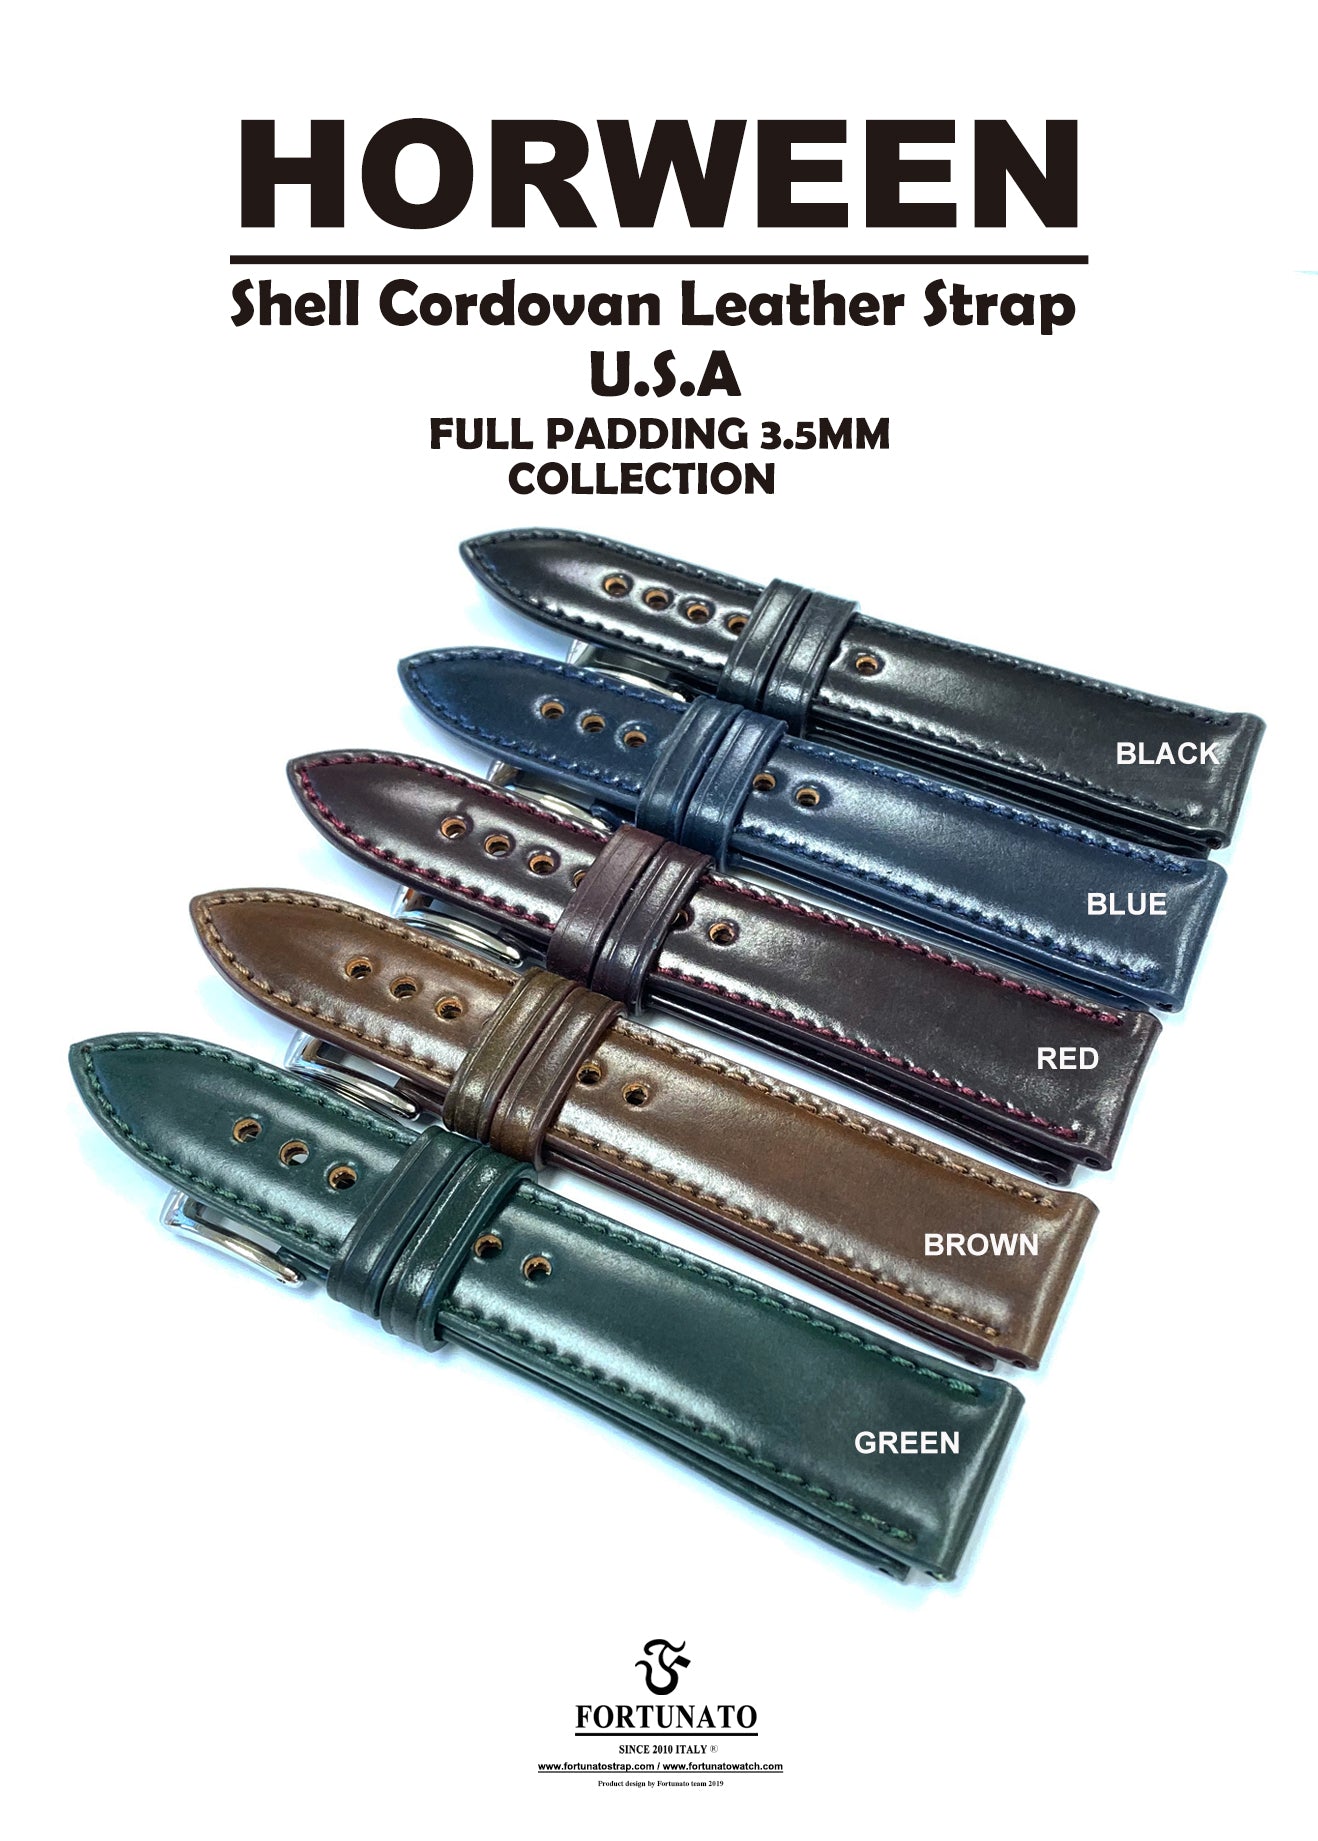 Horween shell cordovan – Three Sons Leather Company